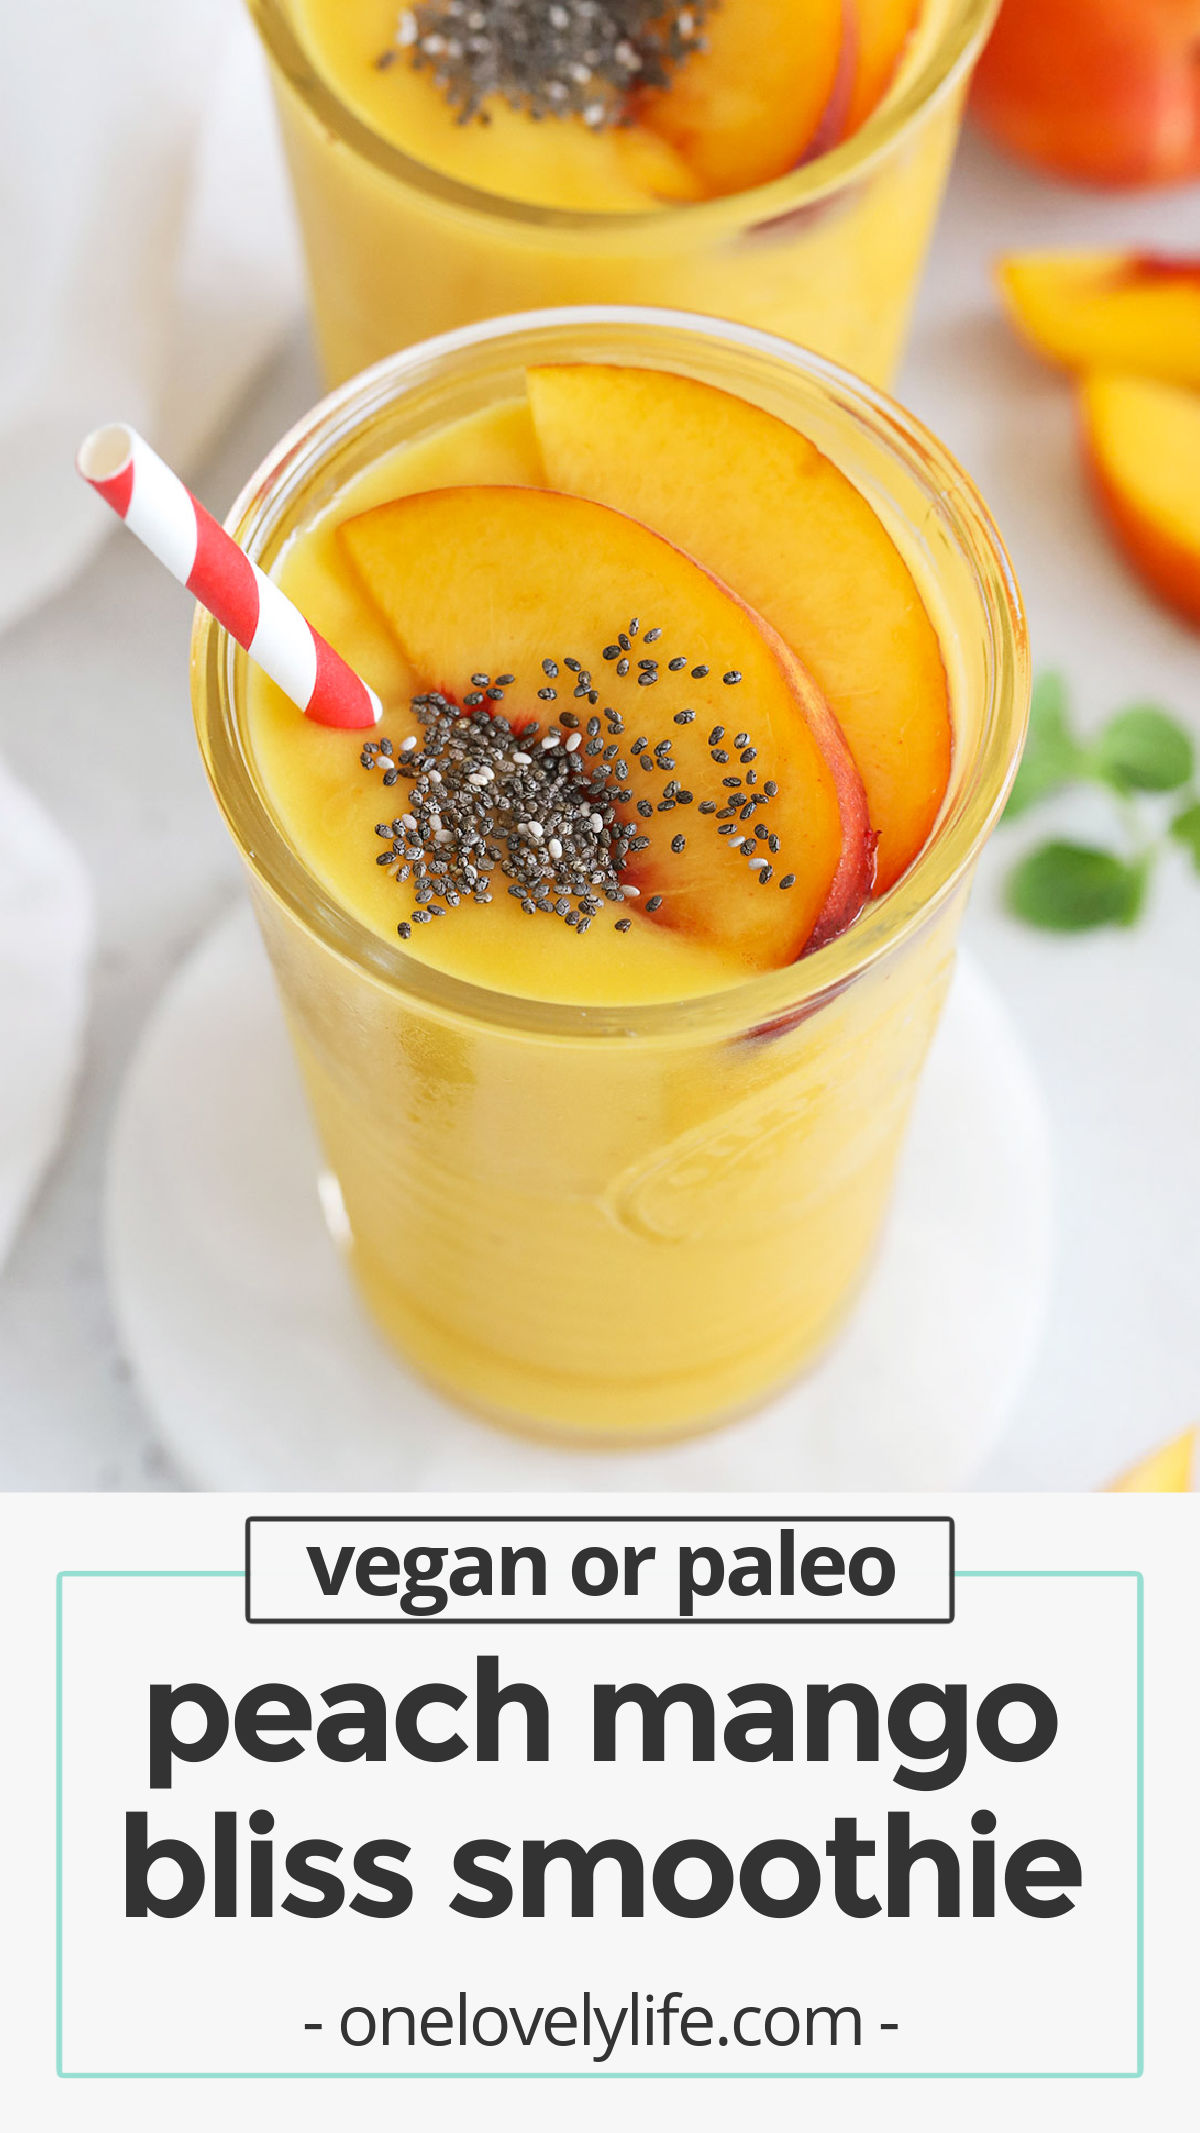 Peach Mango Bliss - A bright, sunny smoothie to sip! This delicious peach mango smoothie is bursting with flavor. (Paleo & Vegan) // Peach Mango Smoothie recipe // mango peach smoothie recipe // peach smoothie recipe / mango smoothie / vegan smoothie / orange smoothie / yellow smoothie / dairy free smoothie / healthy snack / healthy breakfast / kid friendly smoothie / fruit smoothie recipe